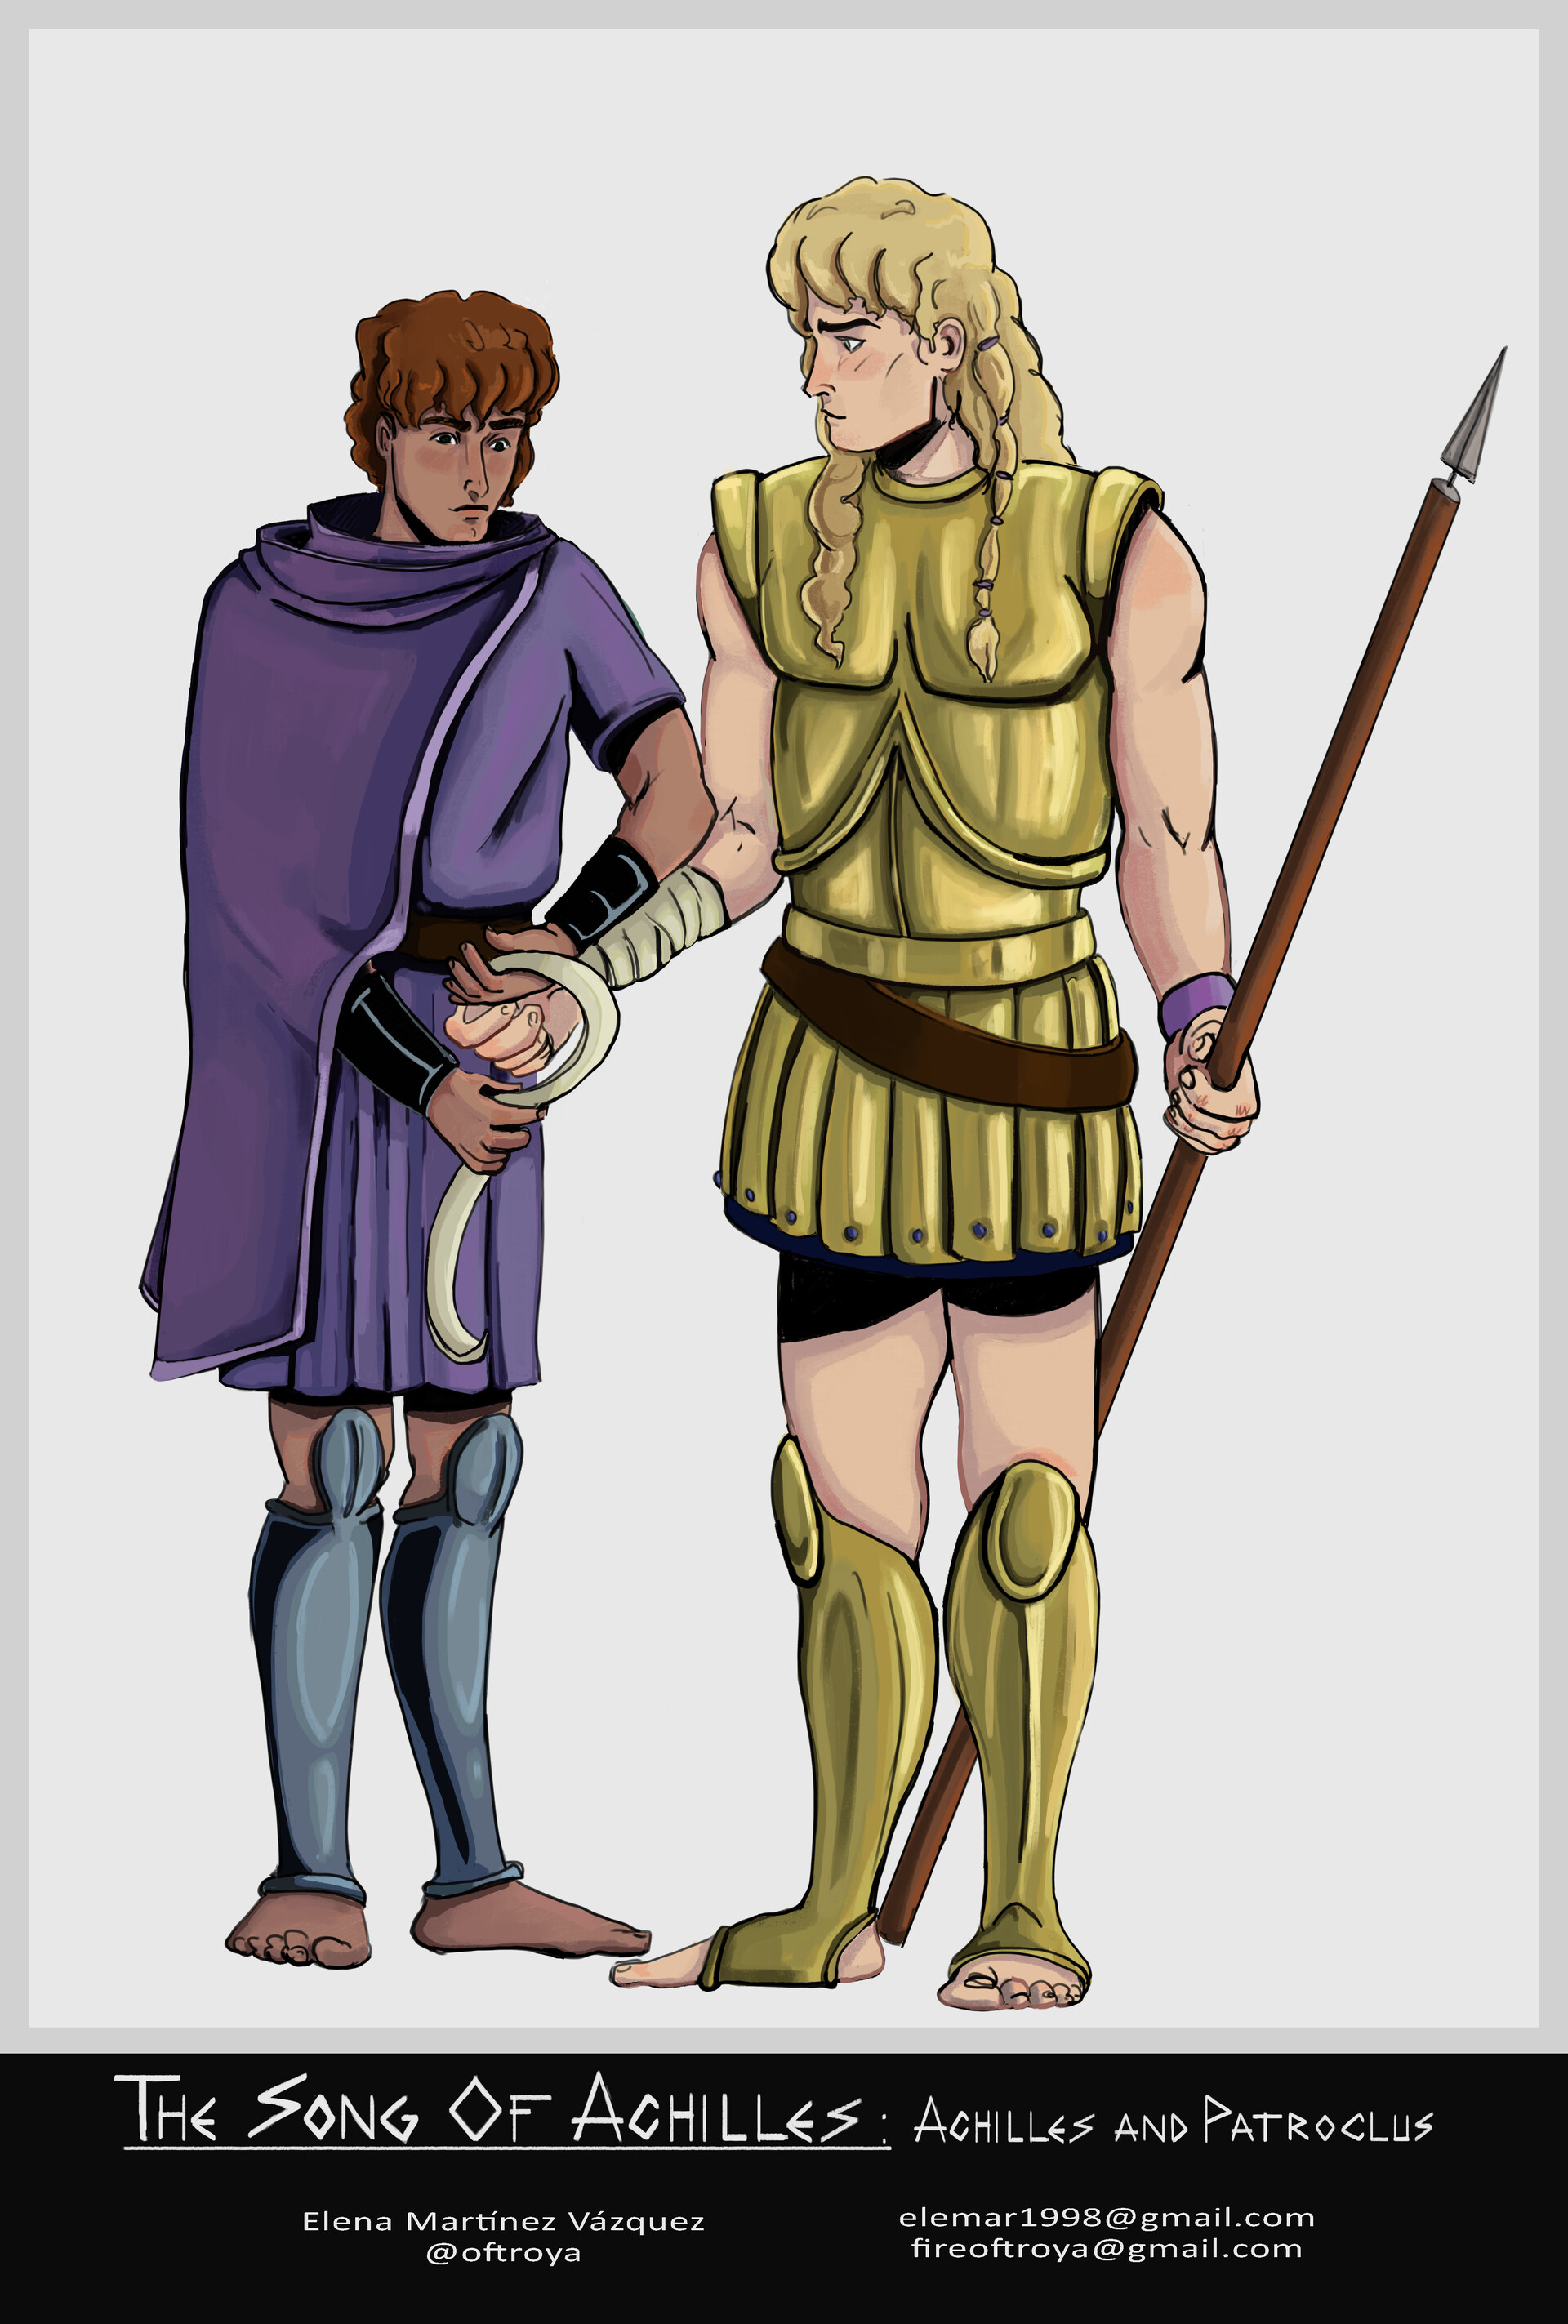 Achilles and Patroclus: Archetypal Heroes